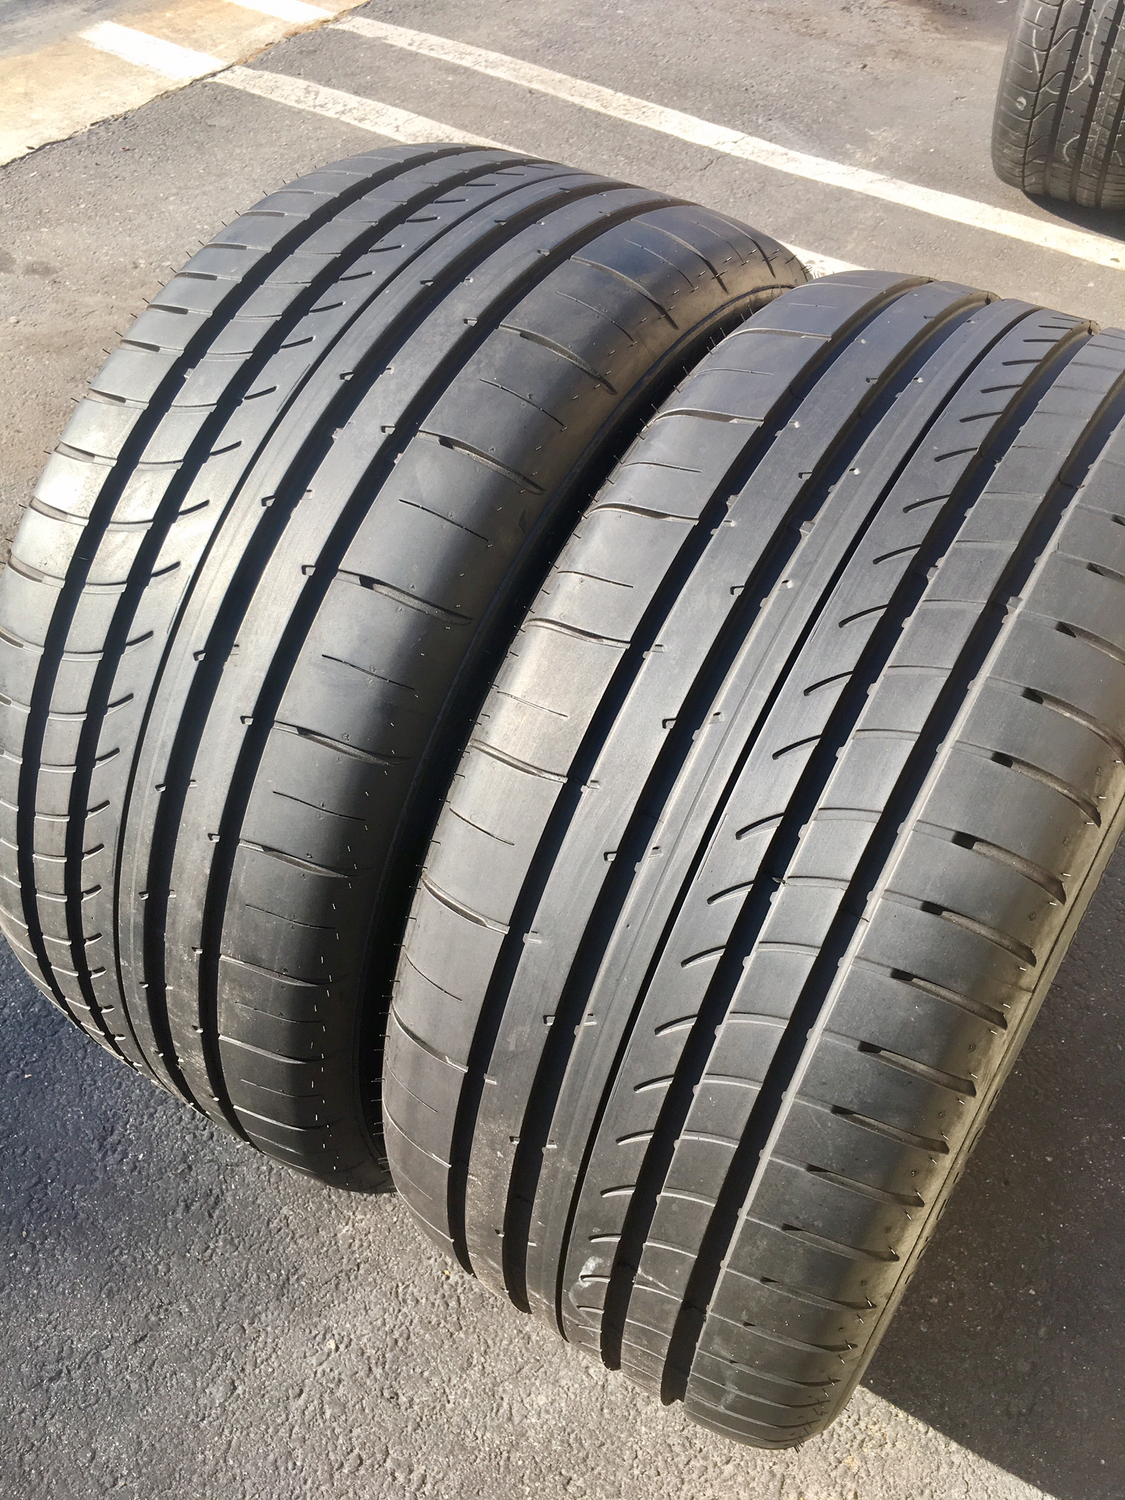 2 USED TIRES 275/35R20 Goodyear EAGLE F1 ASYMMETRIC 2 RUNONFLAT WITH 80% TREAD LIFE 